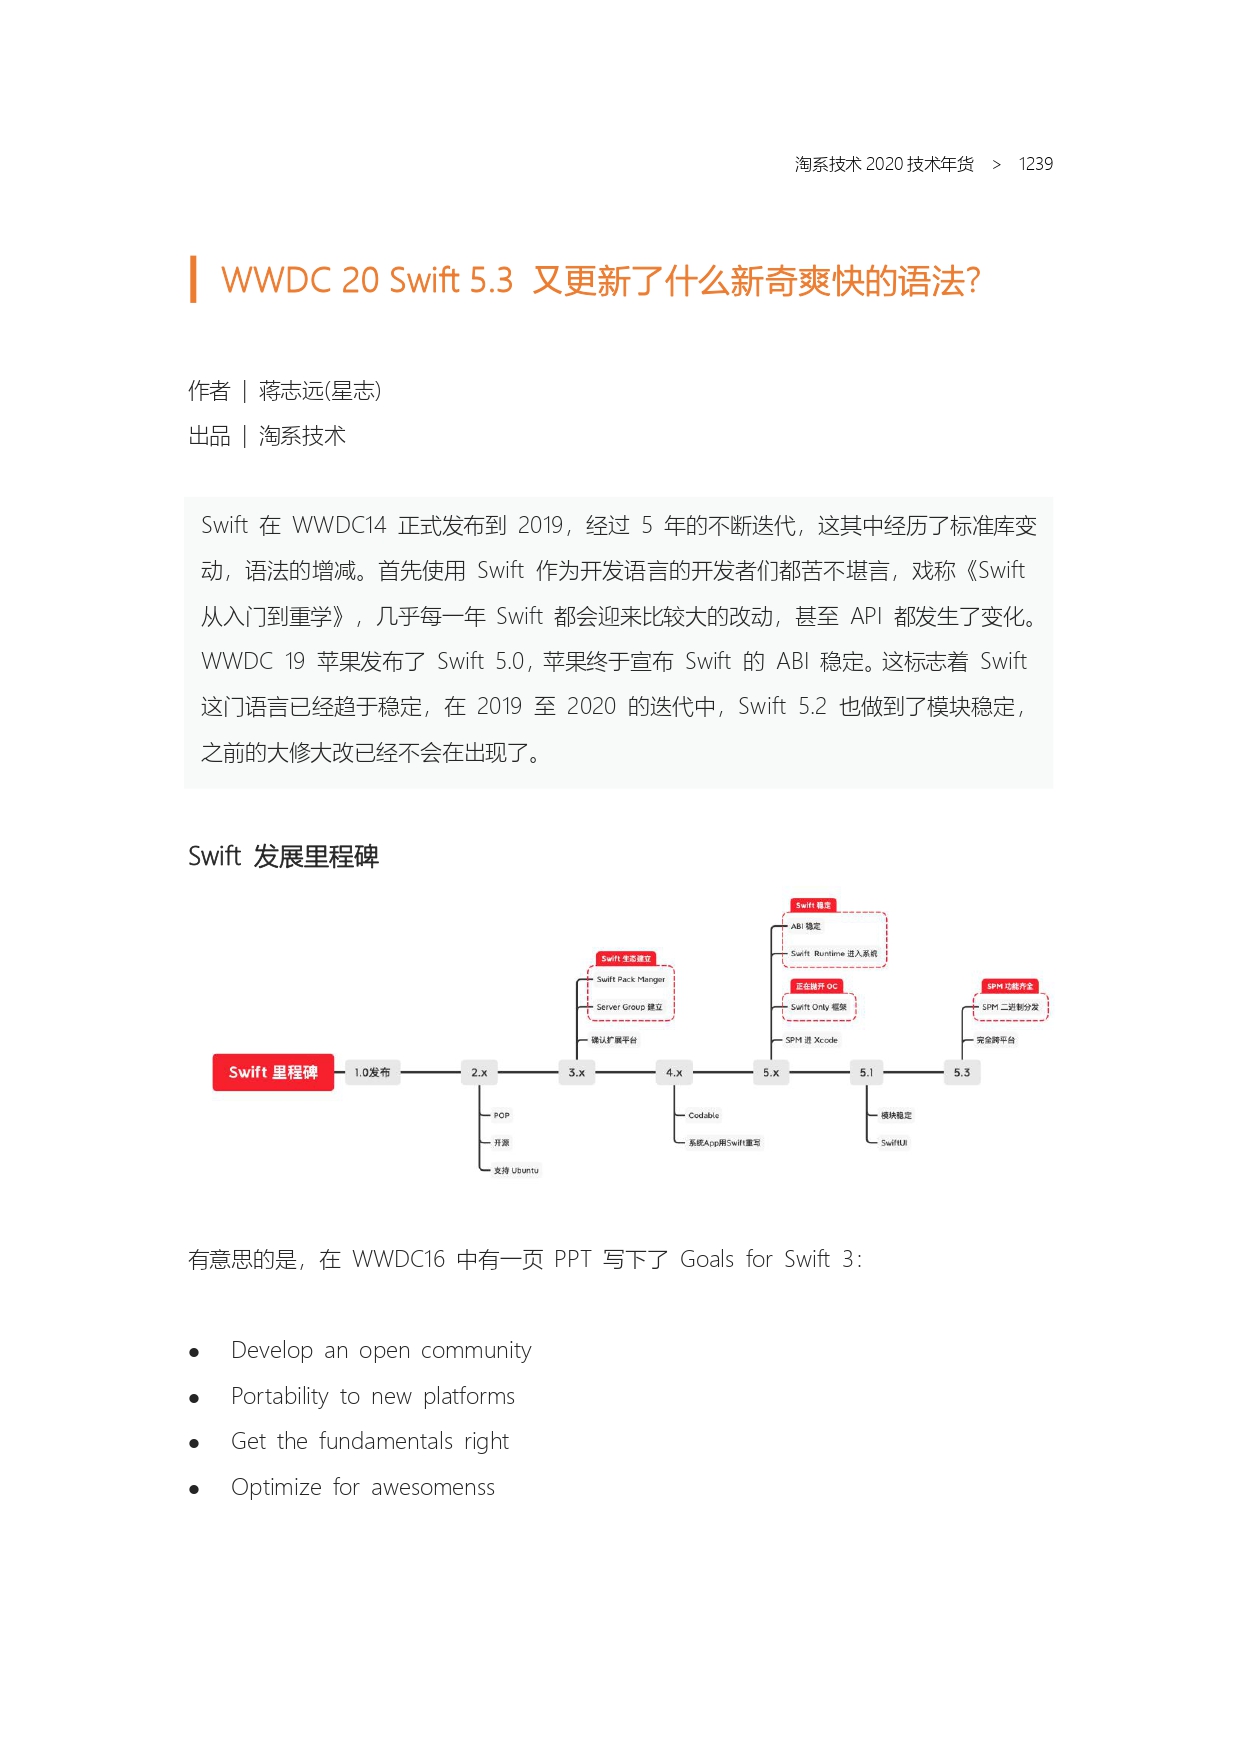 The Complete Works of Tao Technology 2020-1239-1312_page-0001.jpg